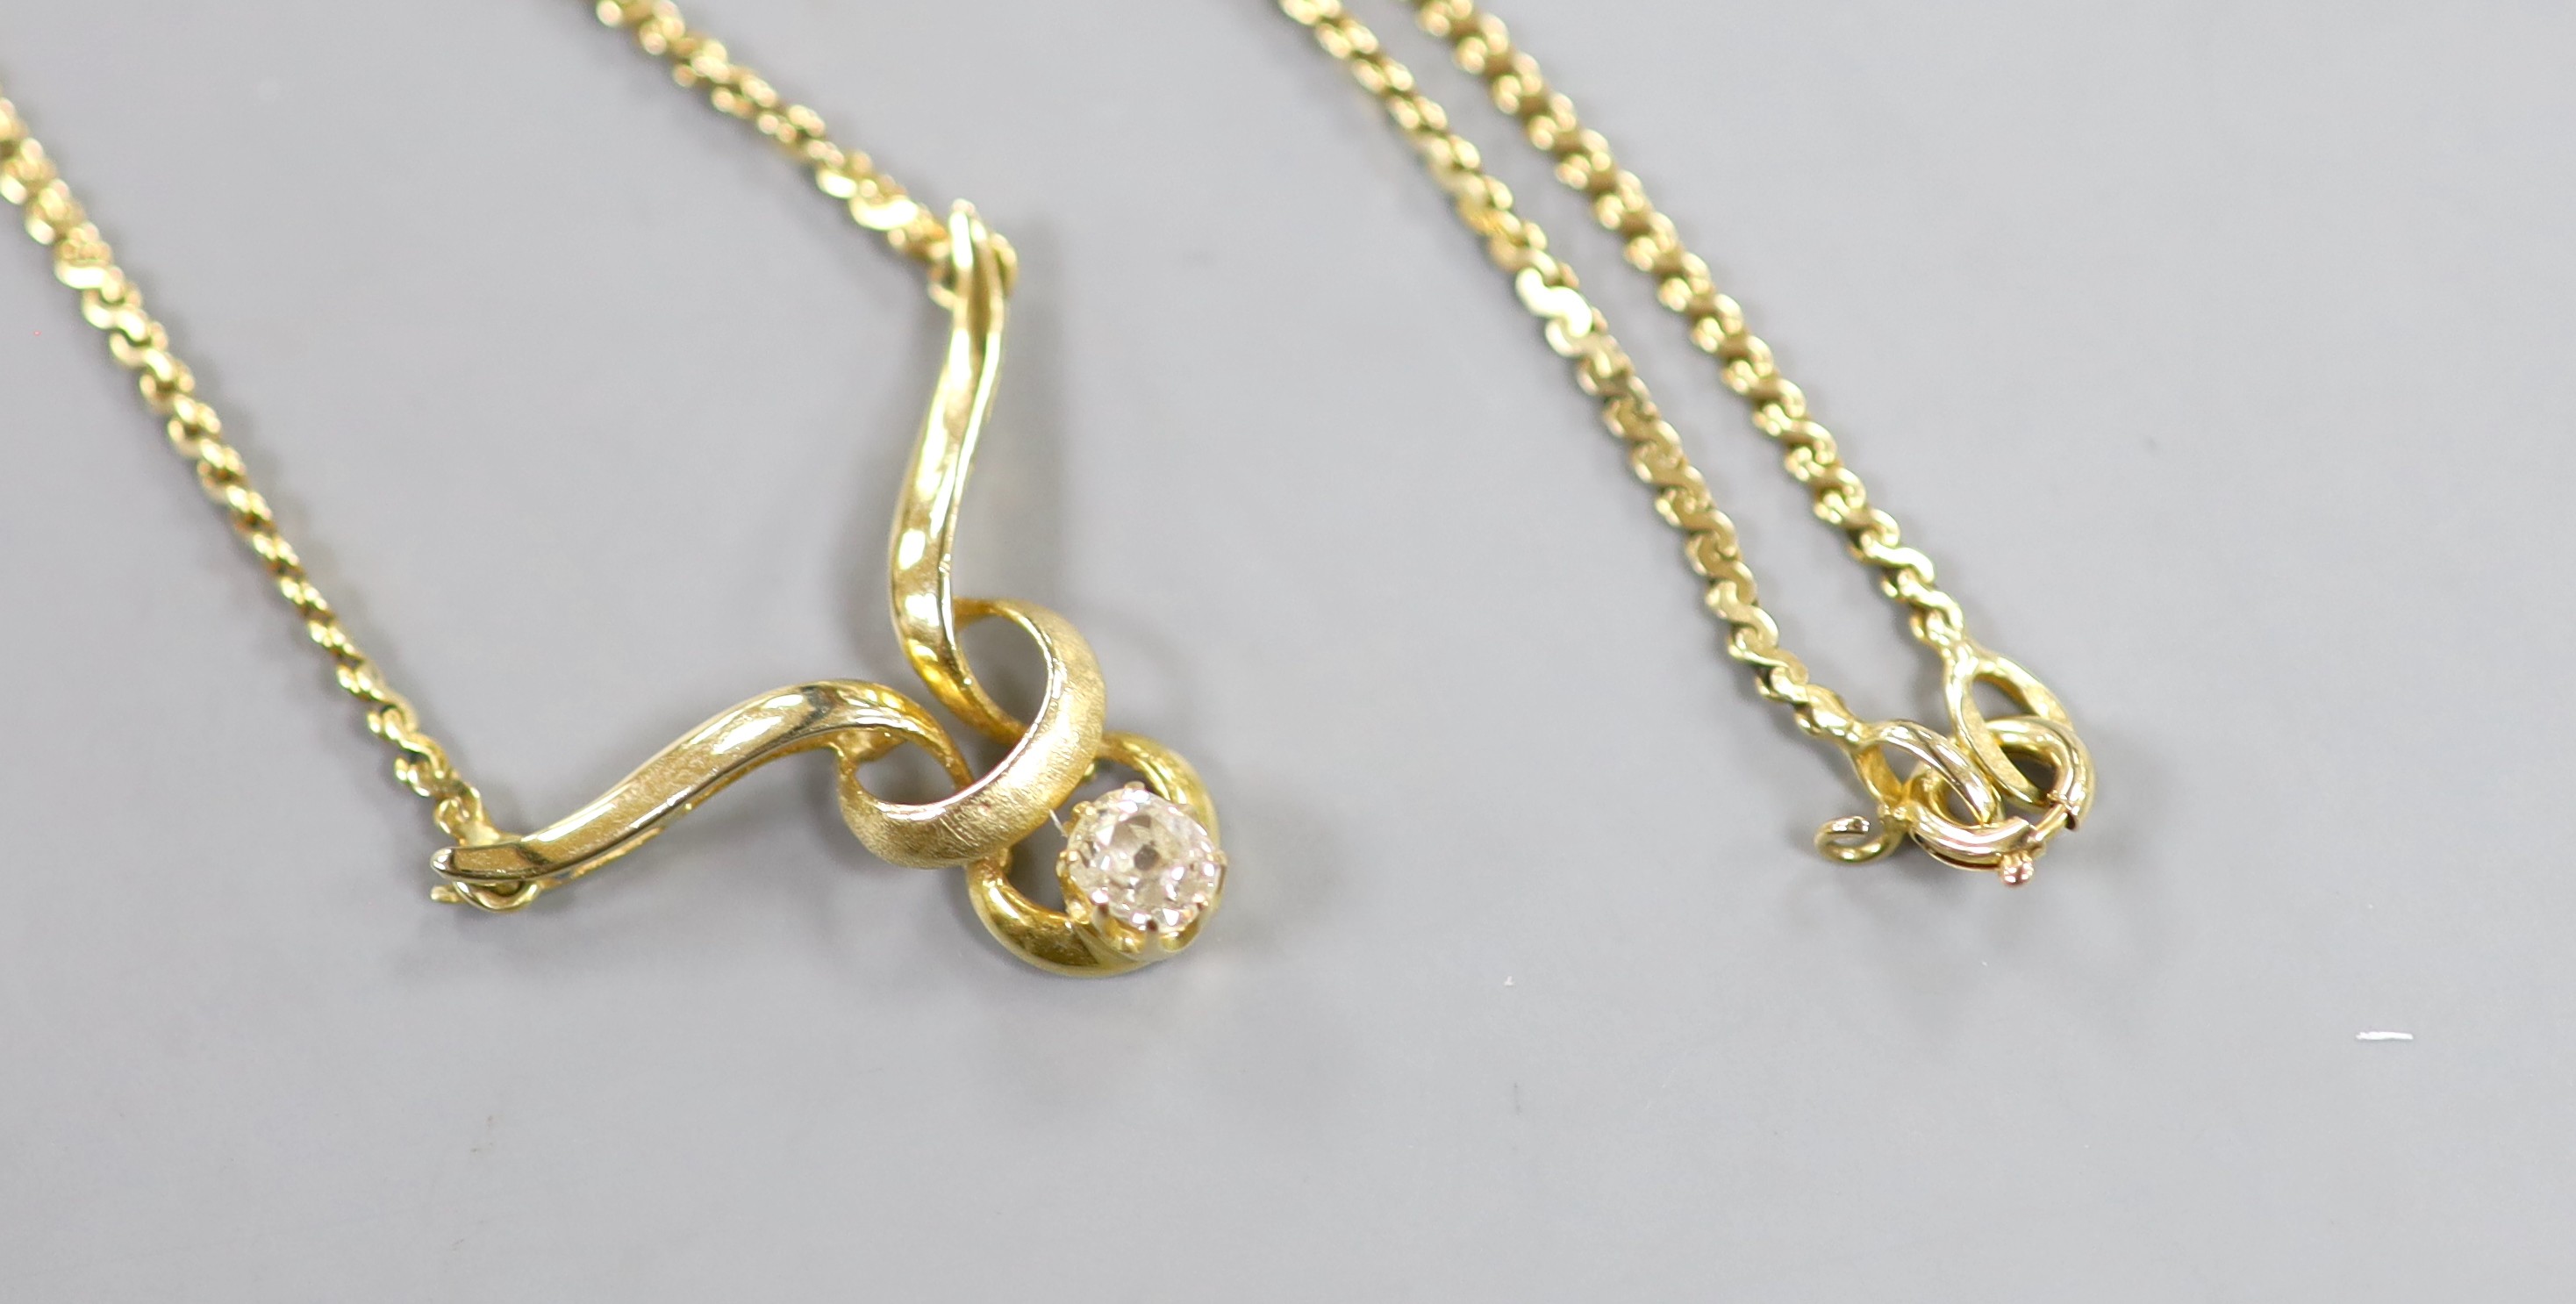 A 9ct gold and diamond pendant necklace, 44cm, gross weight 6.1 grams.